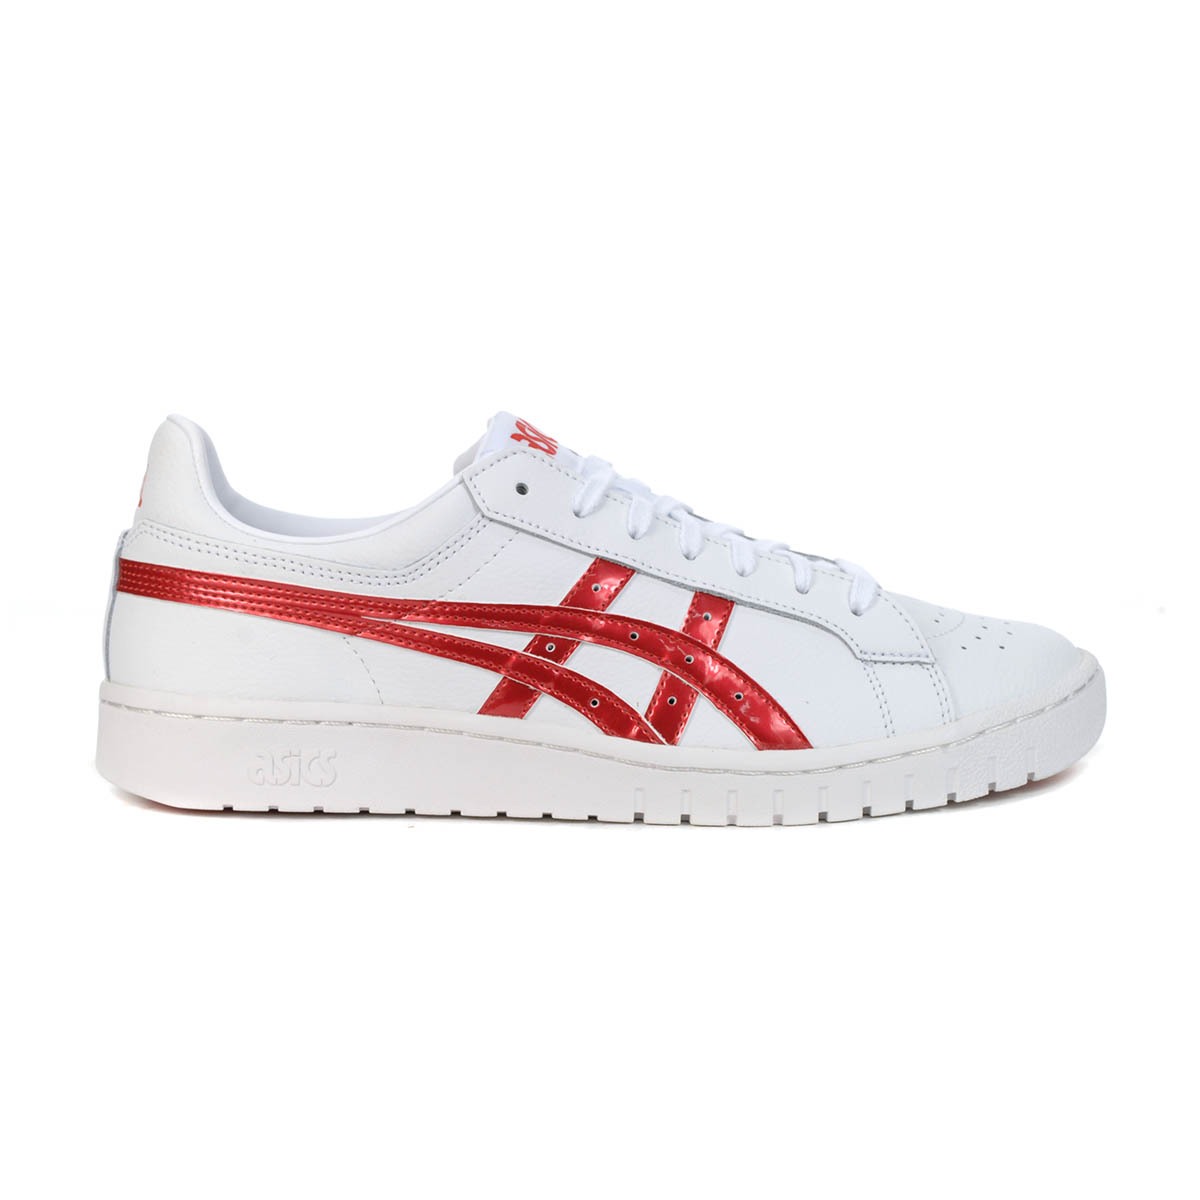 ASICS Men's Gel-PTG White/Classic Red Sneakers 1191A089.102